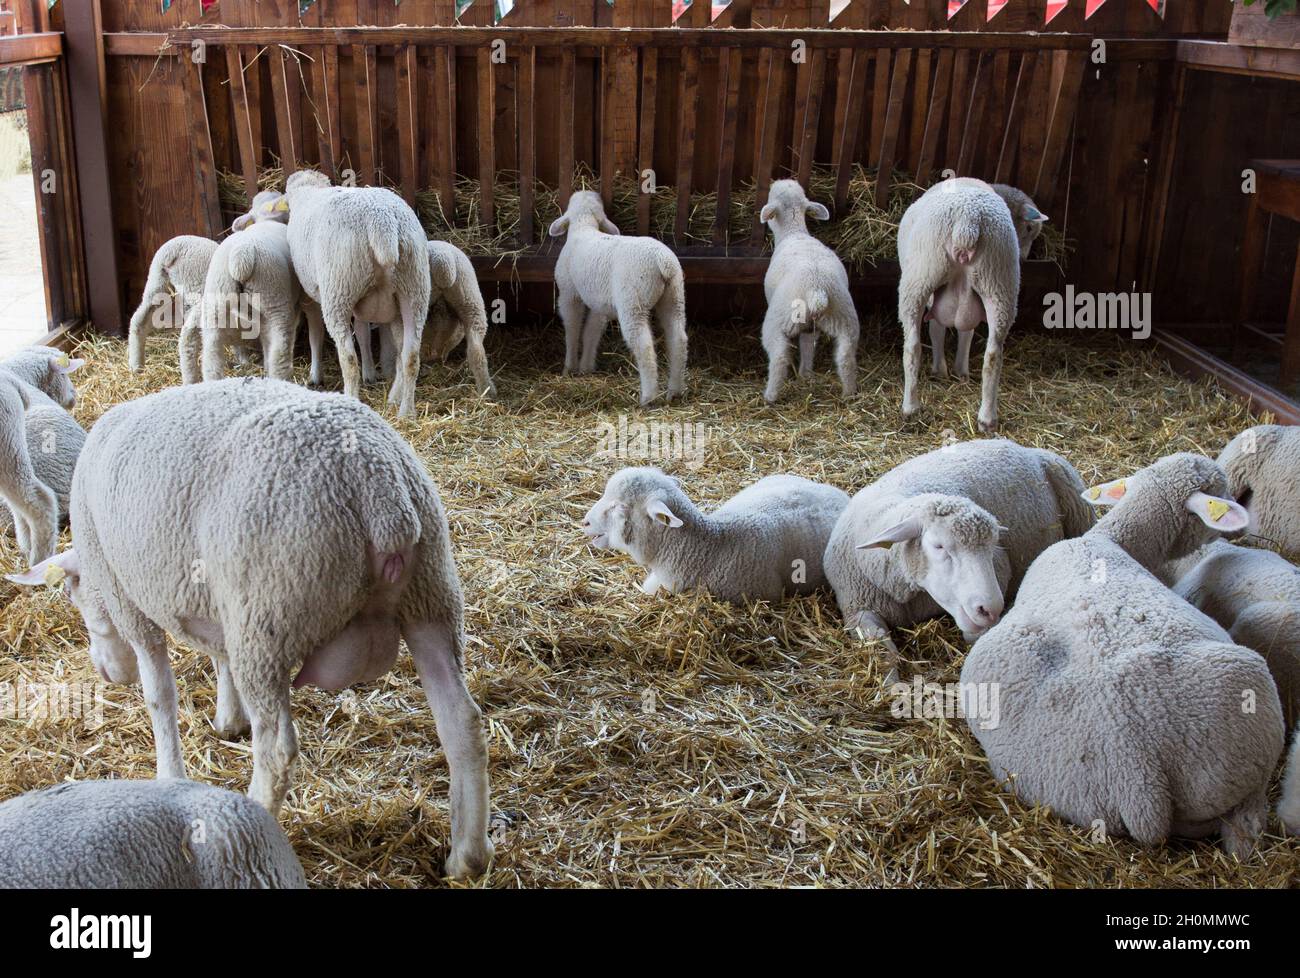 Group of sheep laying on straw while lambs eating hay from wooden manger in barn Stock Photo